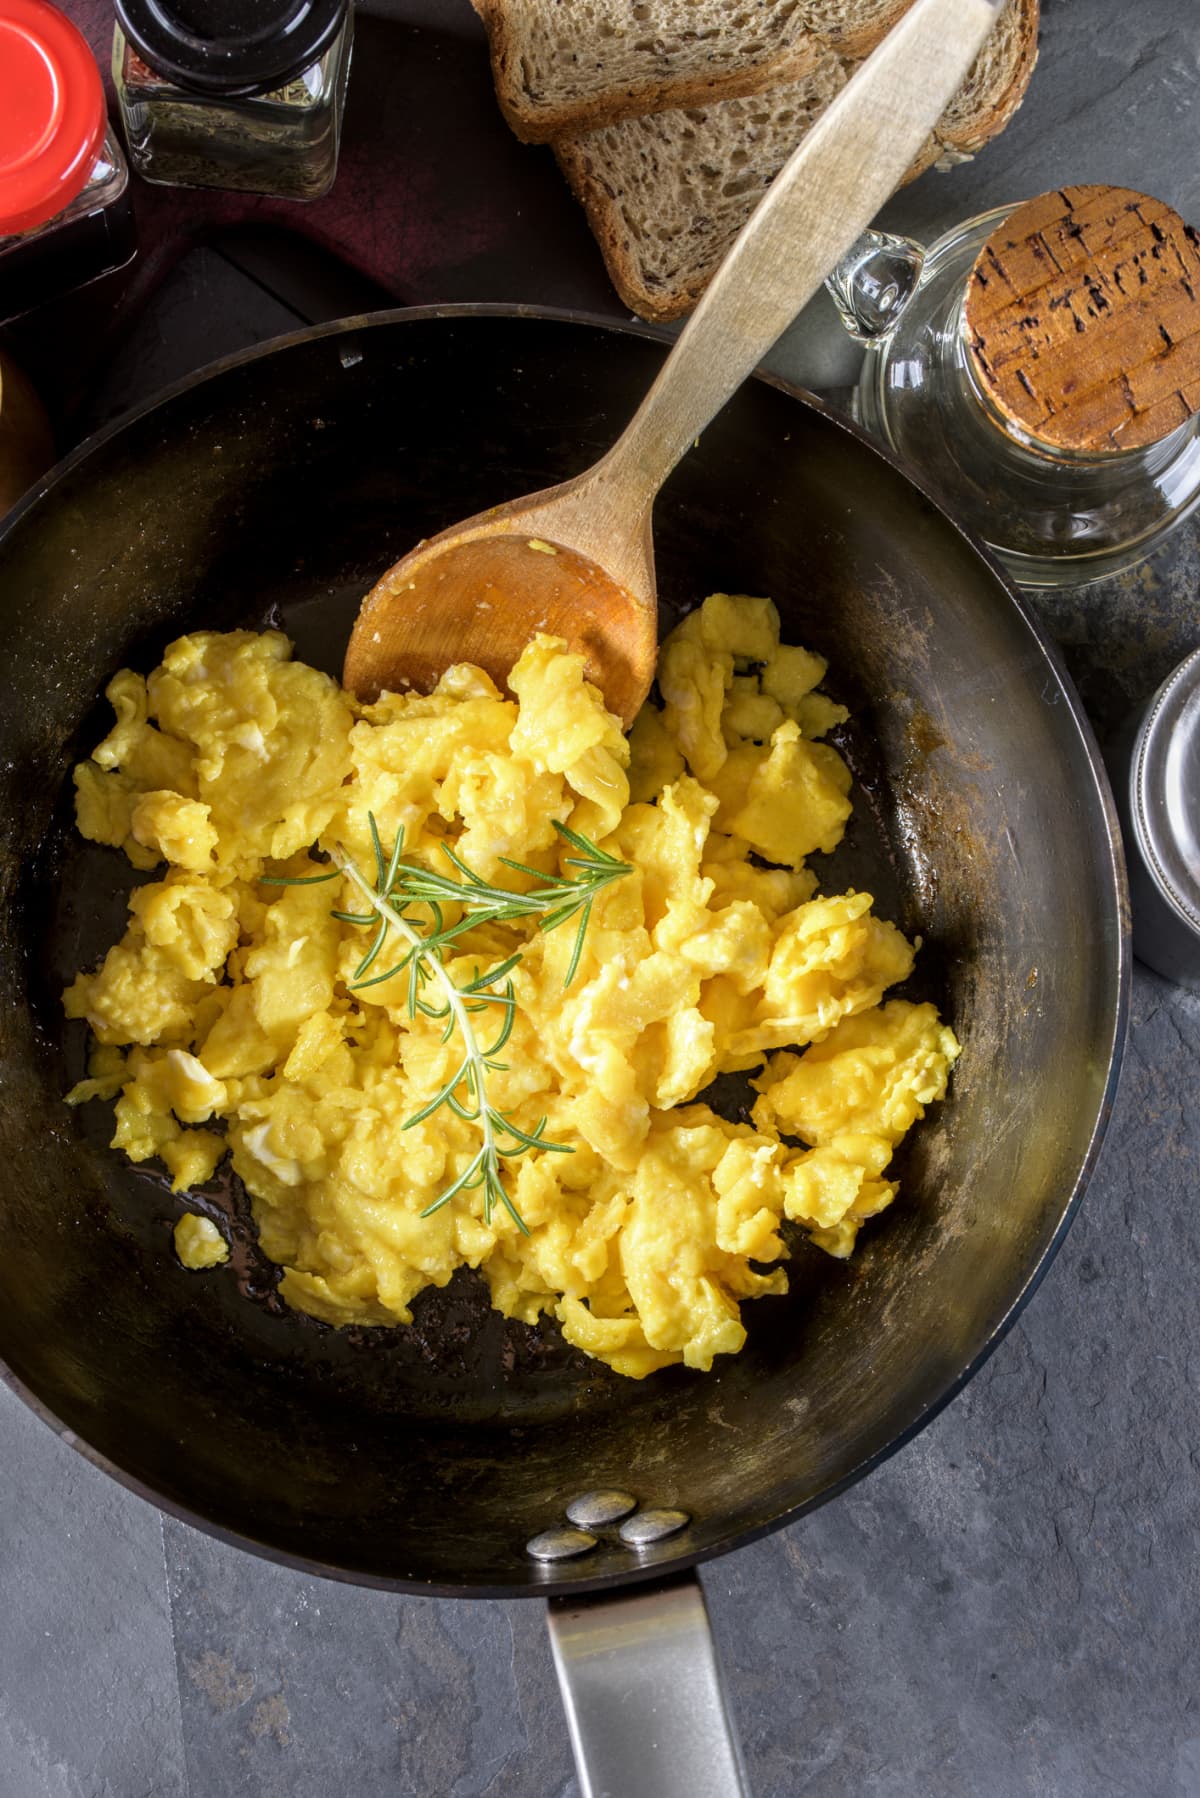 Scrambled eggs with coffee